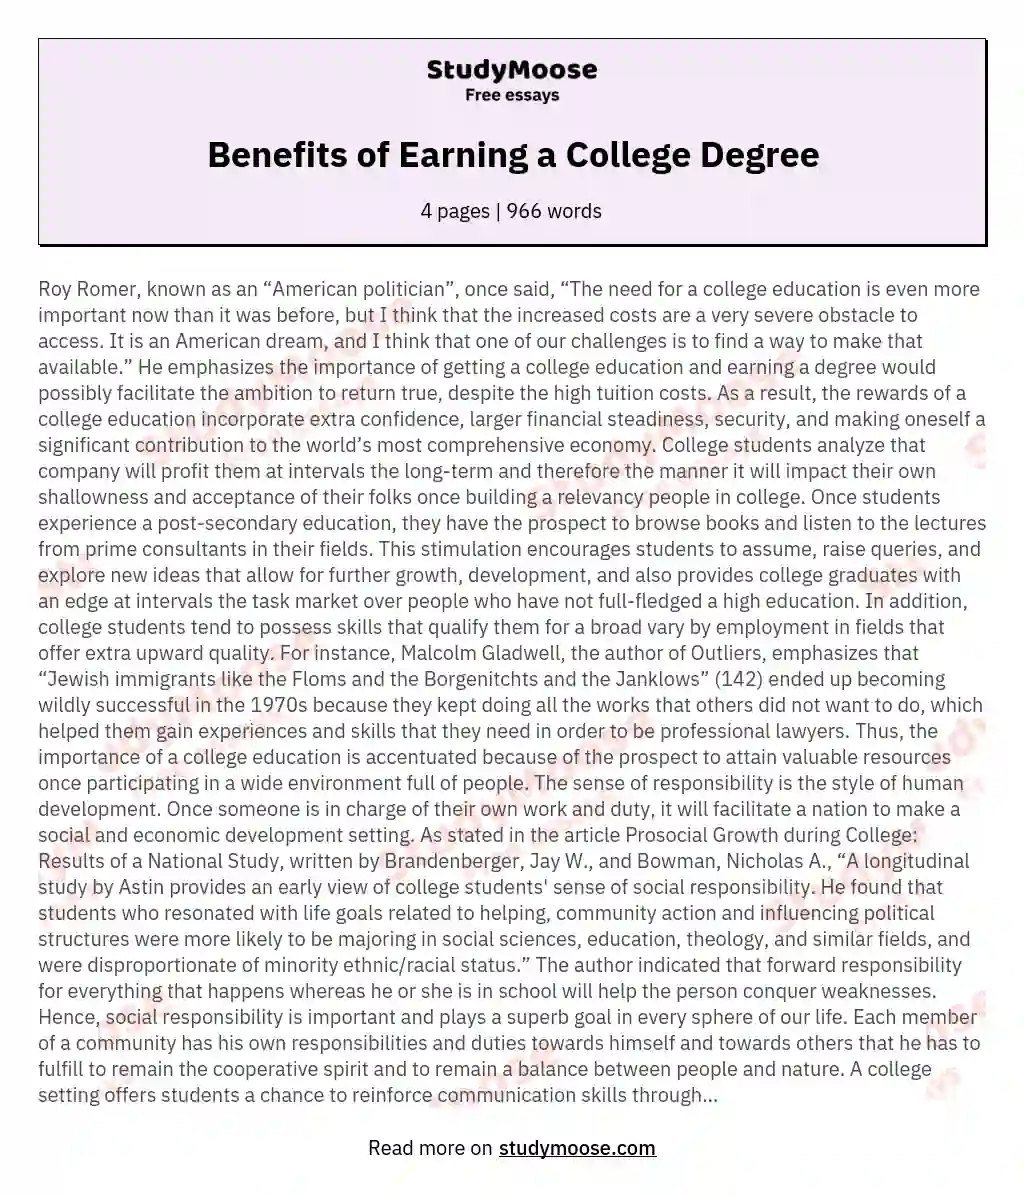 Benefits of Earning a College Degree essay